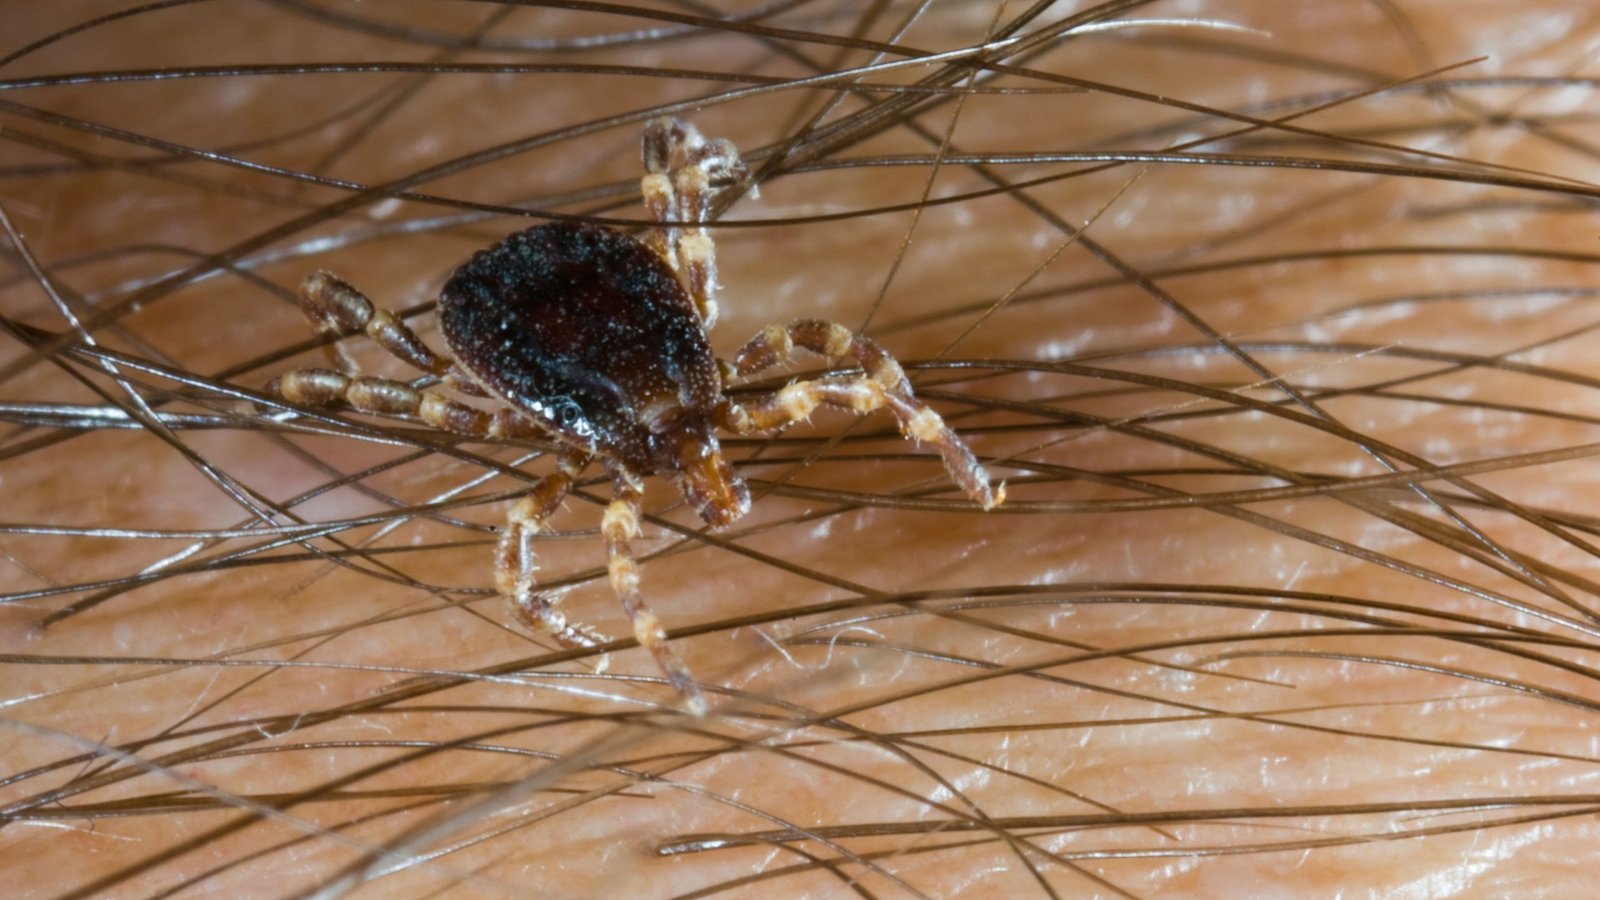 Plague of bloodsucking & disease spreading ‘Monster Ticks’ infesting Brit holiday hotspots as they spread across Europe